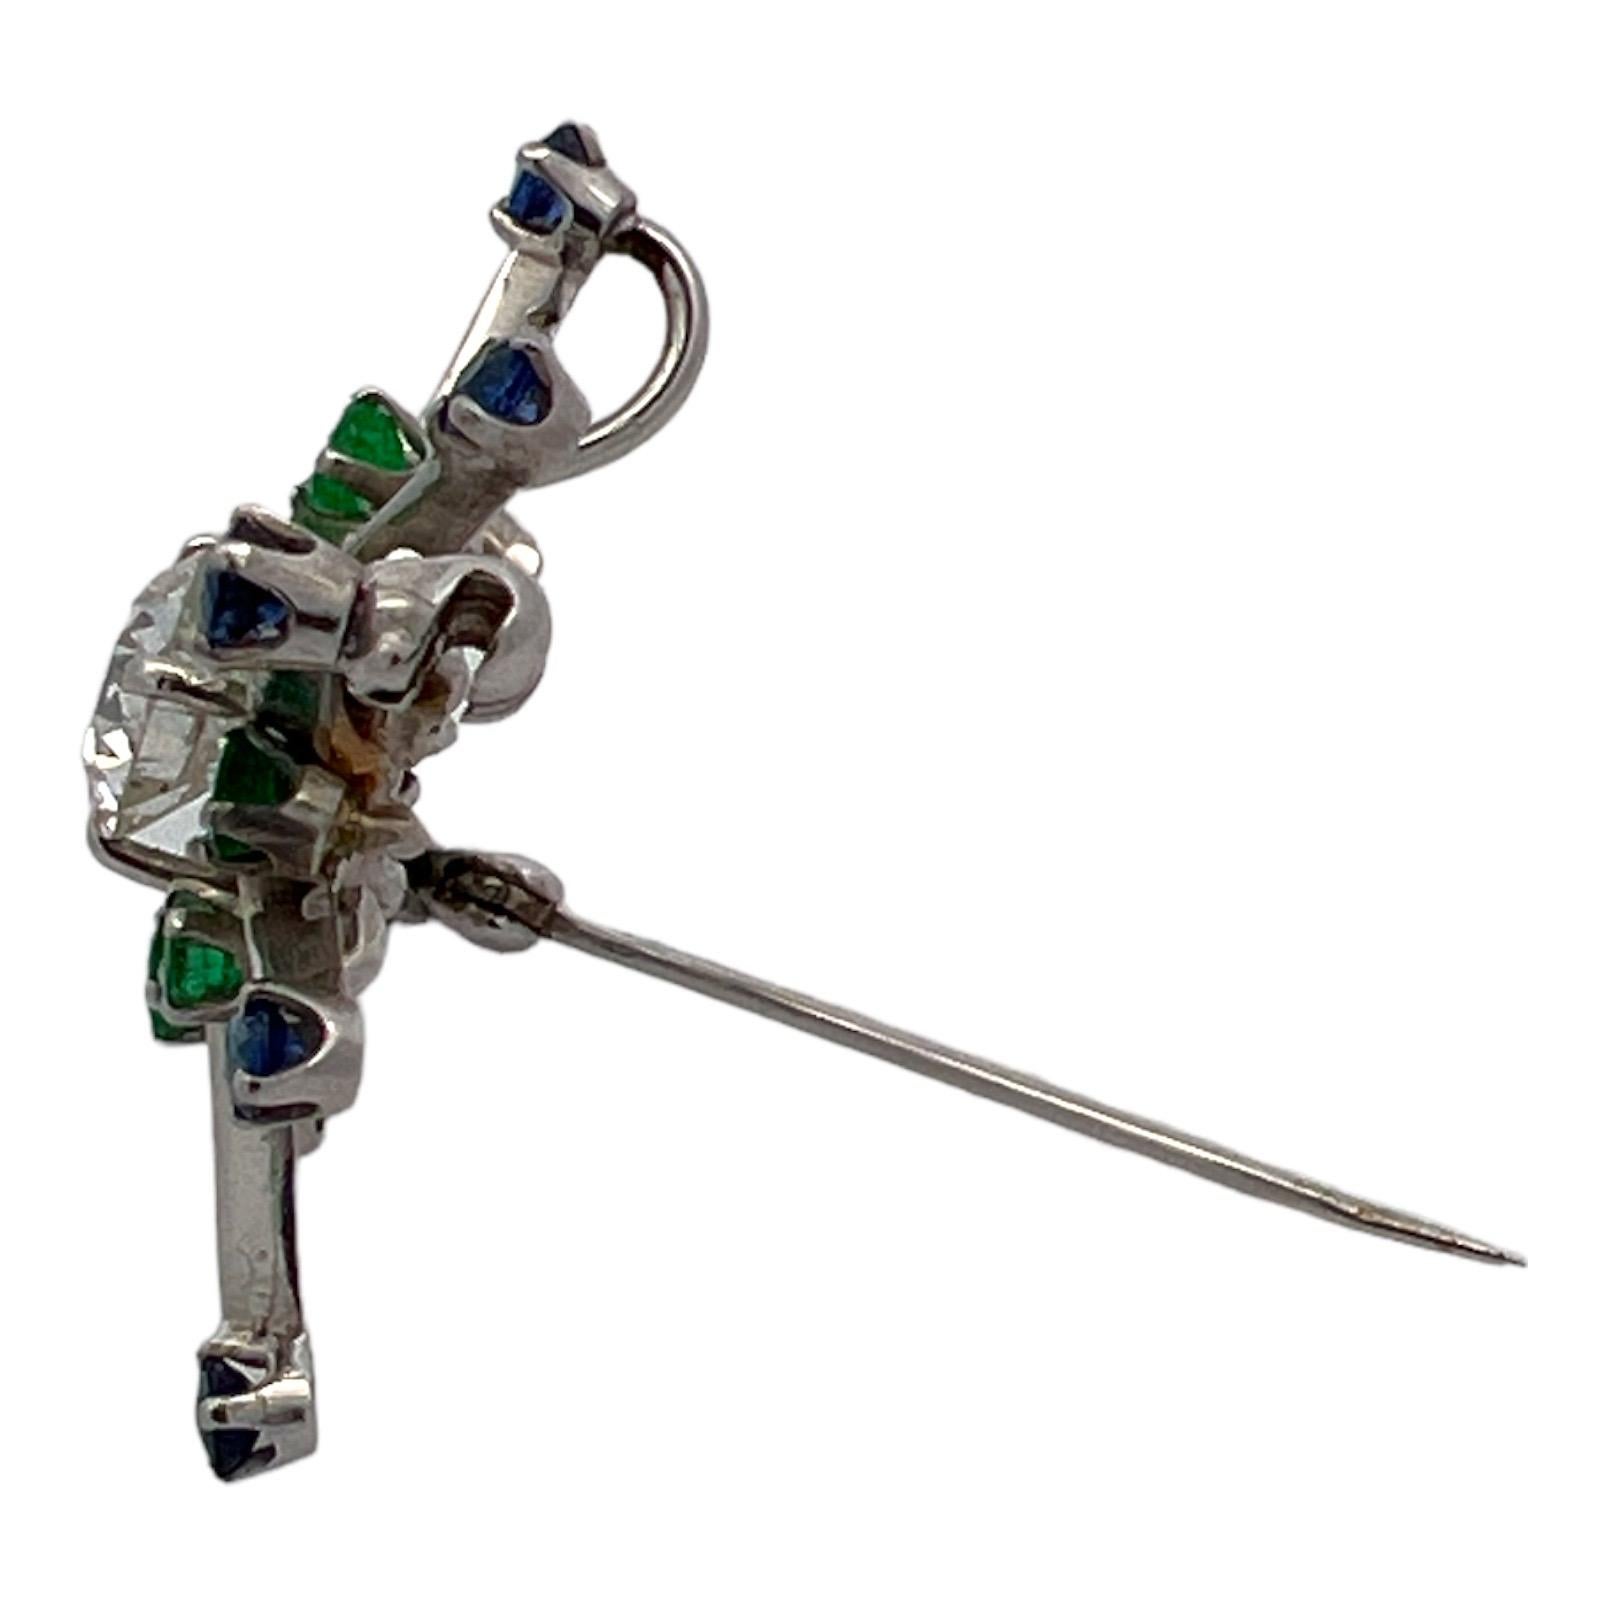 Gorgeous diamond, sapphire, and emerald pendant and pin handcrafted in 14 karat white gold. The vintage pendant features a center Old European cut diiamond weighing approximately 1.05 carats and graded H color and SI1 clarity. Another 8 natural